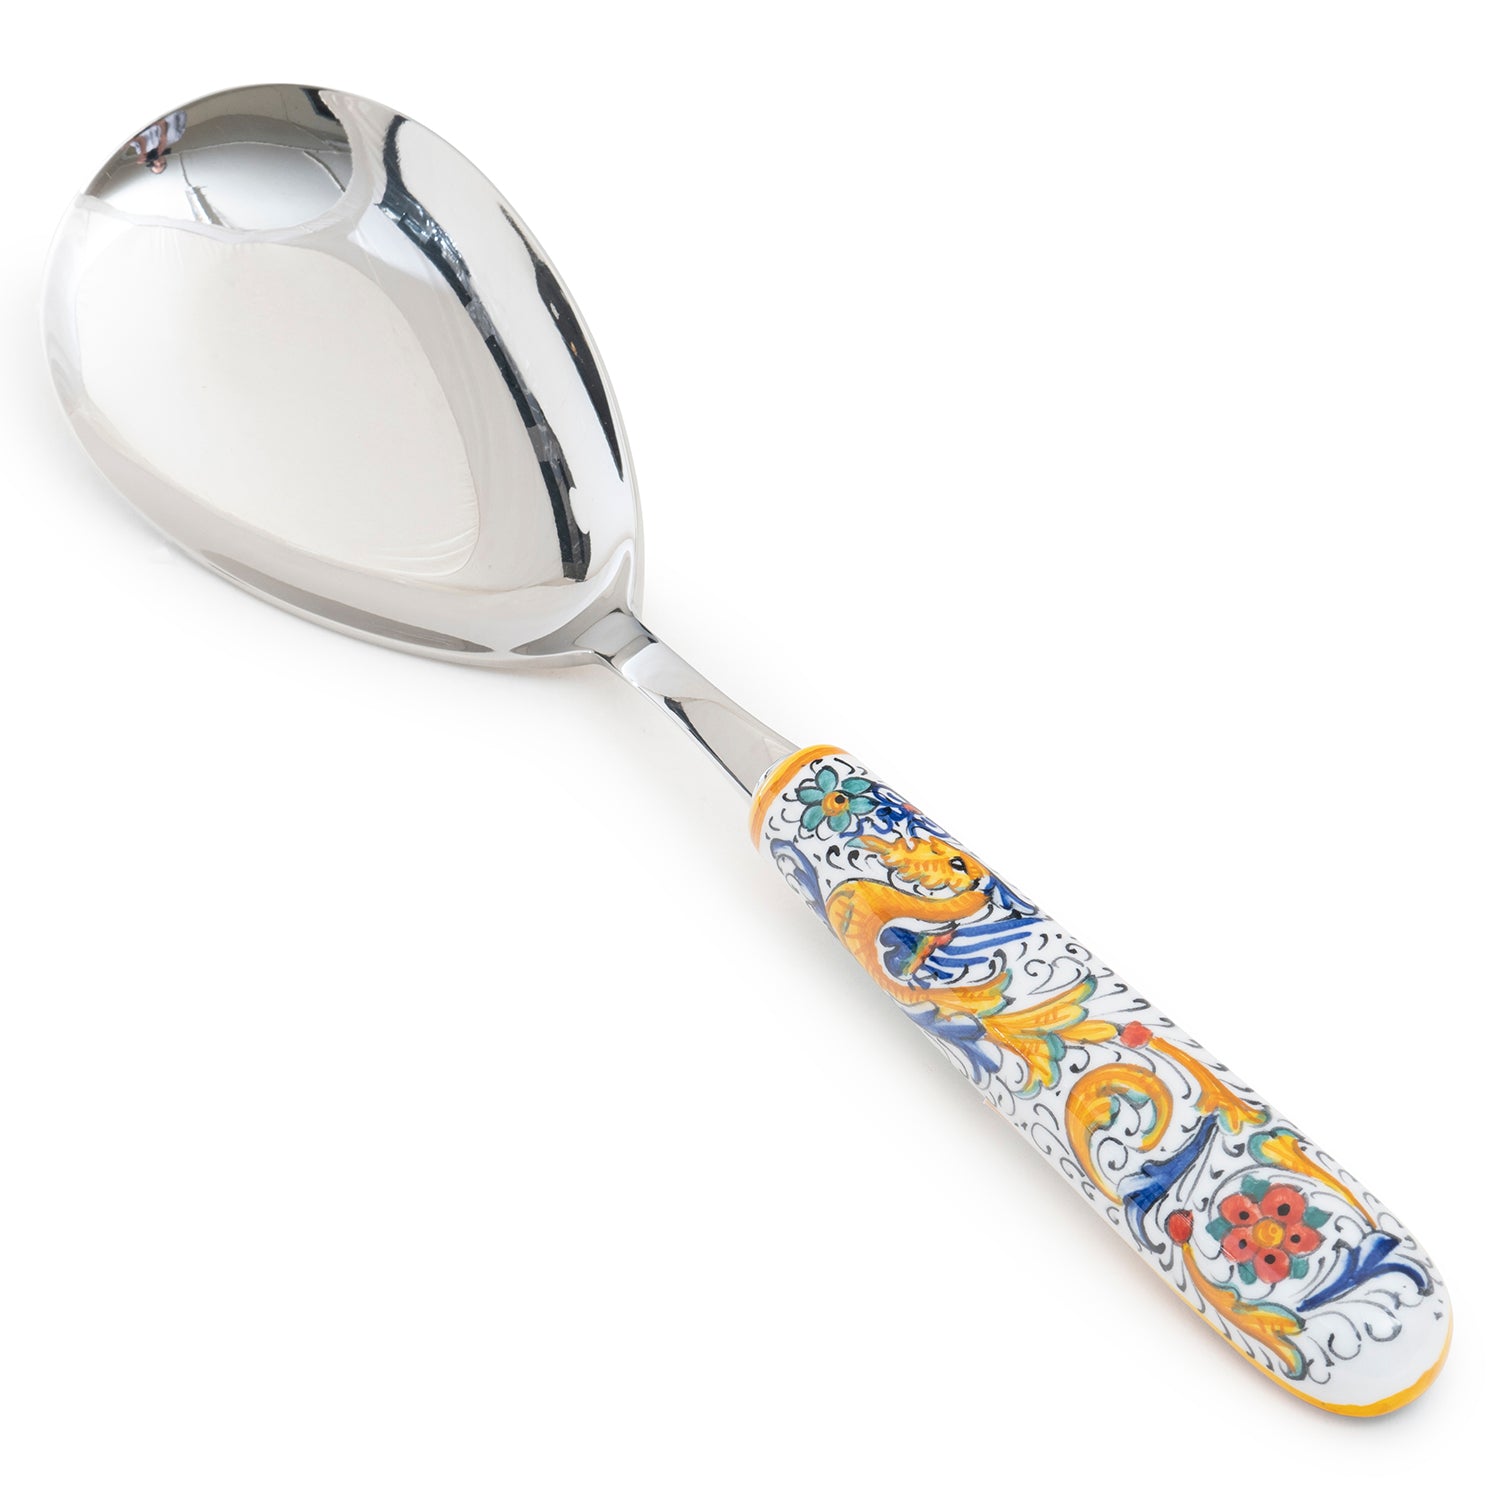 Raffaellesco - Utensil Risotto Spoon, ceramics, pottery, italian design, majolica, handmade, handcrafted, handpainted, home decor, kitchen art, home goods, deruta, majolica, Artisan, treasures, traditional art, modern art, gift ideas, style, SF, shop small business, artists, shop online, landmark store, legacy, one of a kind, limited edition, gift guide, gift shop, retail shop, decorations, shopping, italy, home staging, home decorating, home interiors